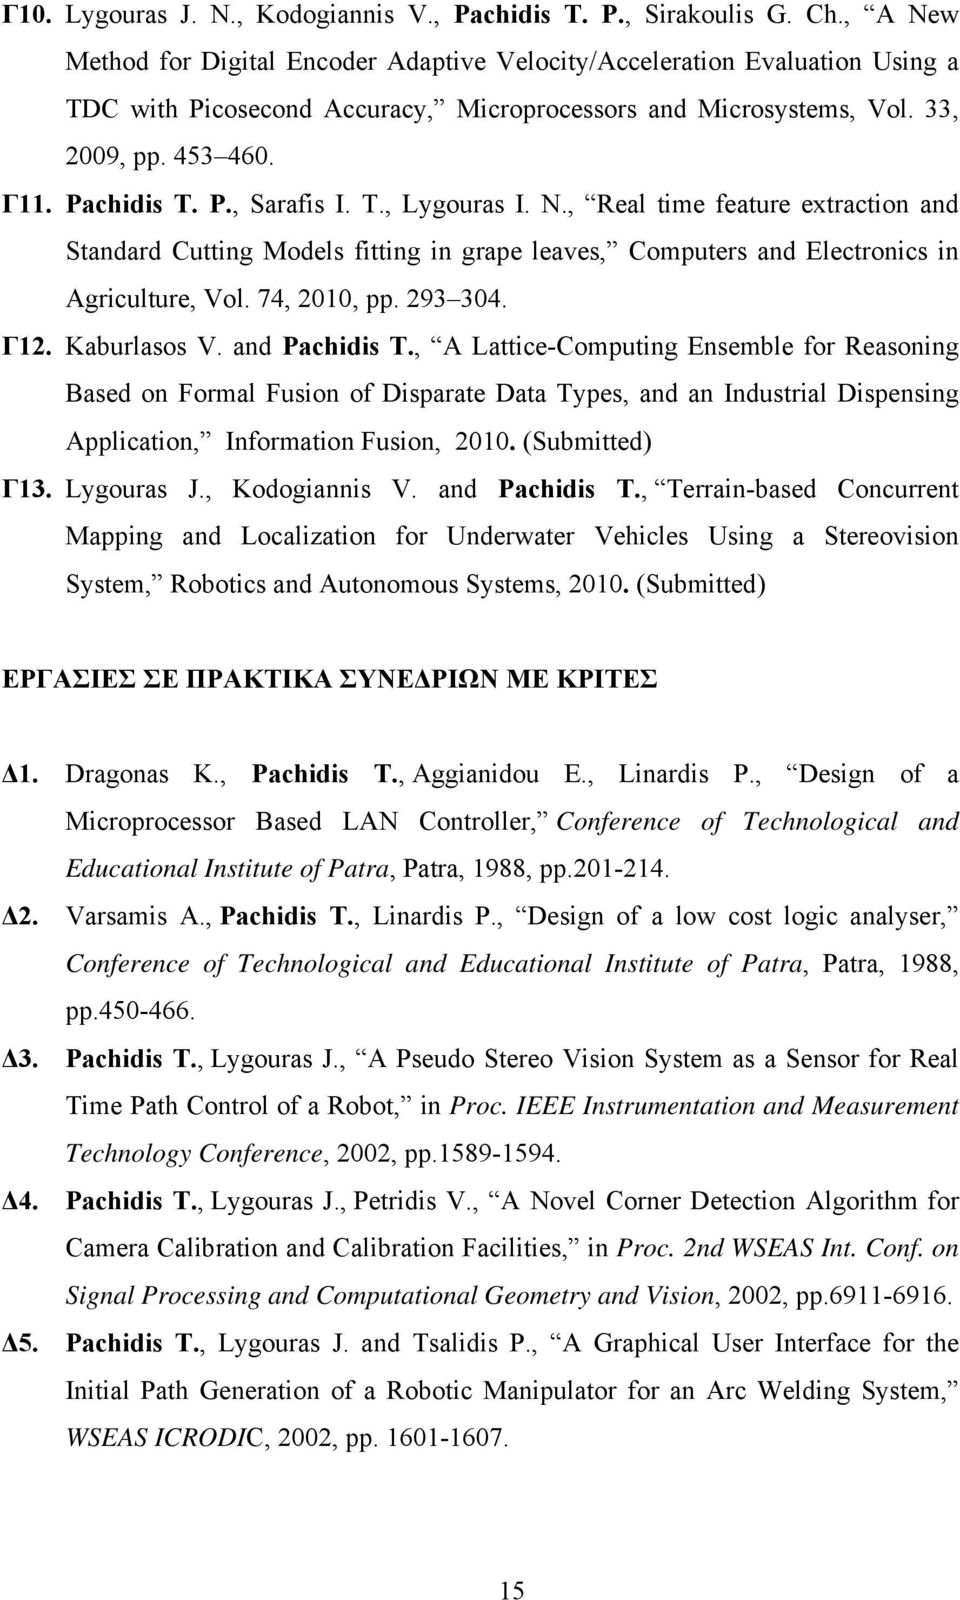 T., Lygouras I. N., Real time feature extraction and Standard Cutting Models fitting in grape leaves, Computers and Electronics in Agriculture, Vol. 74, 2010, pp. 293 304. Γ12. Kaburlasos V.